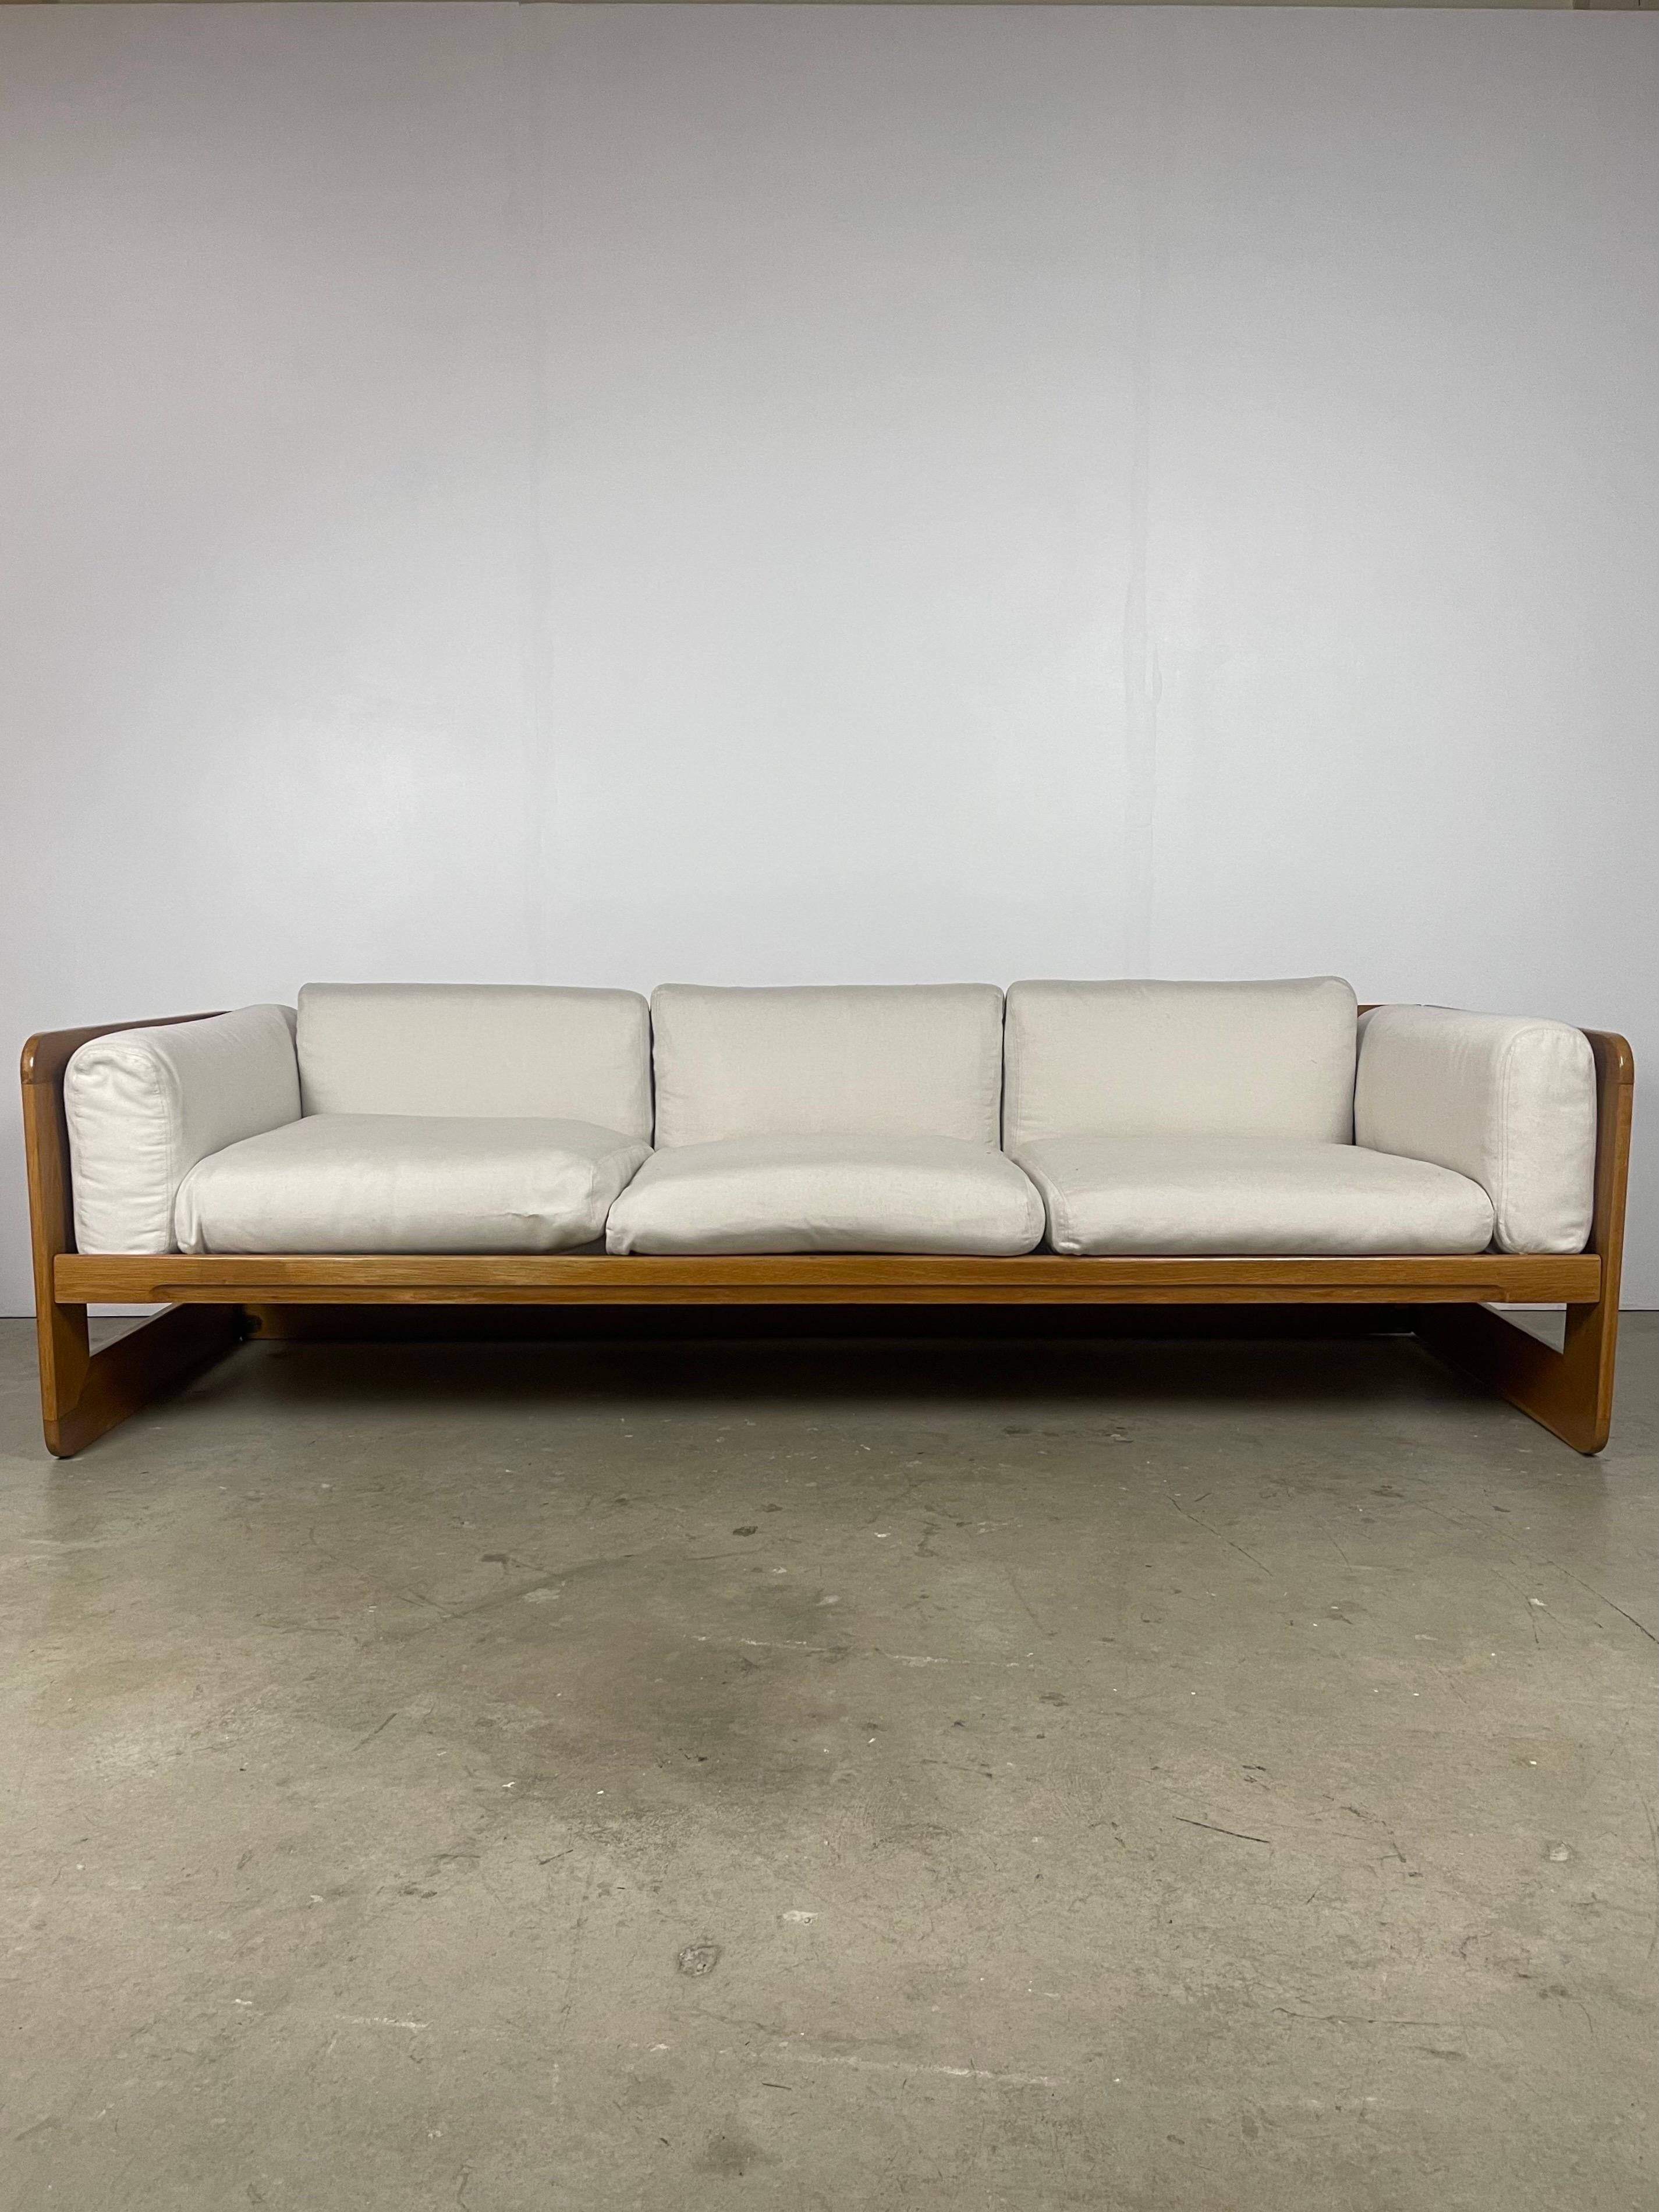 1970s oak framed sofa designed by Giuseppe Raimondi. Frame has been refinished- natural flaws and natural discrepancies in grain color remain. Recommended to replace upholstery- staining is present.